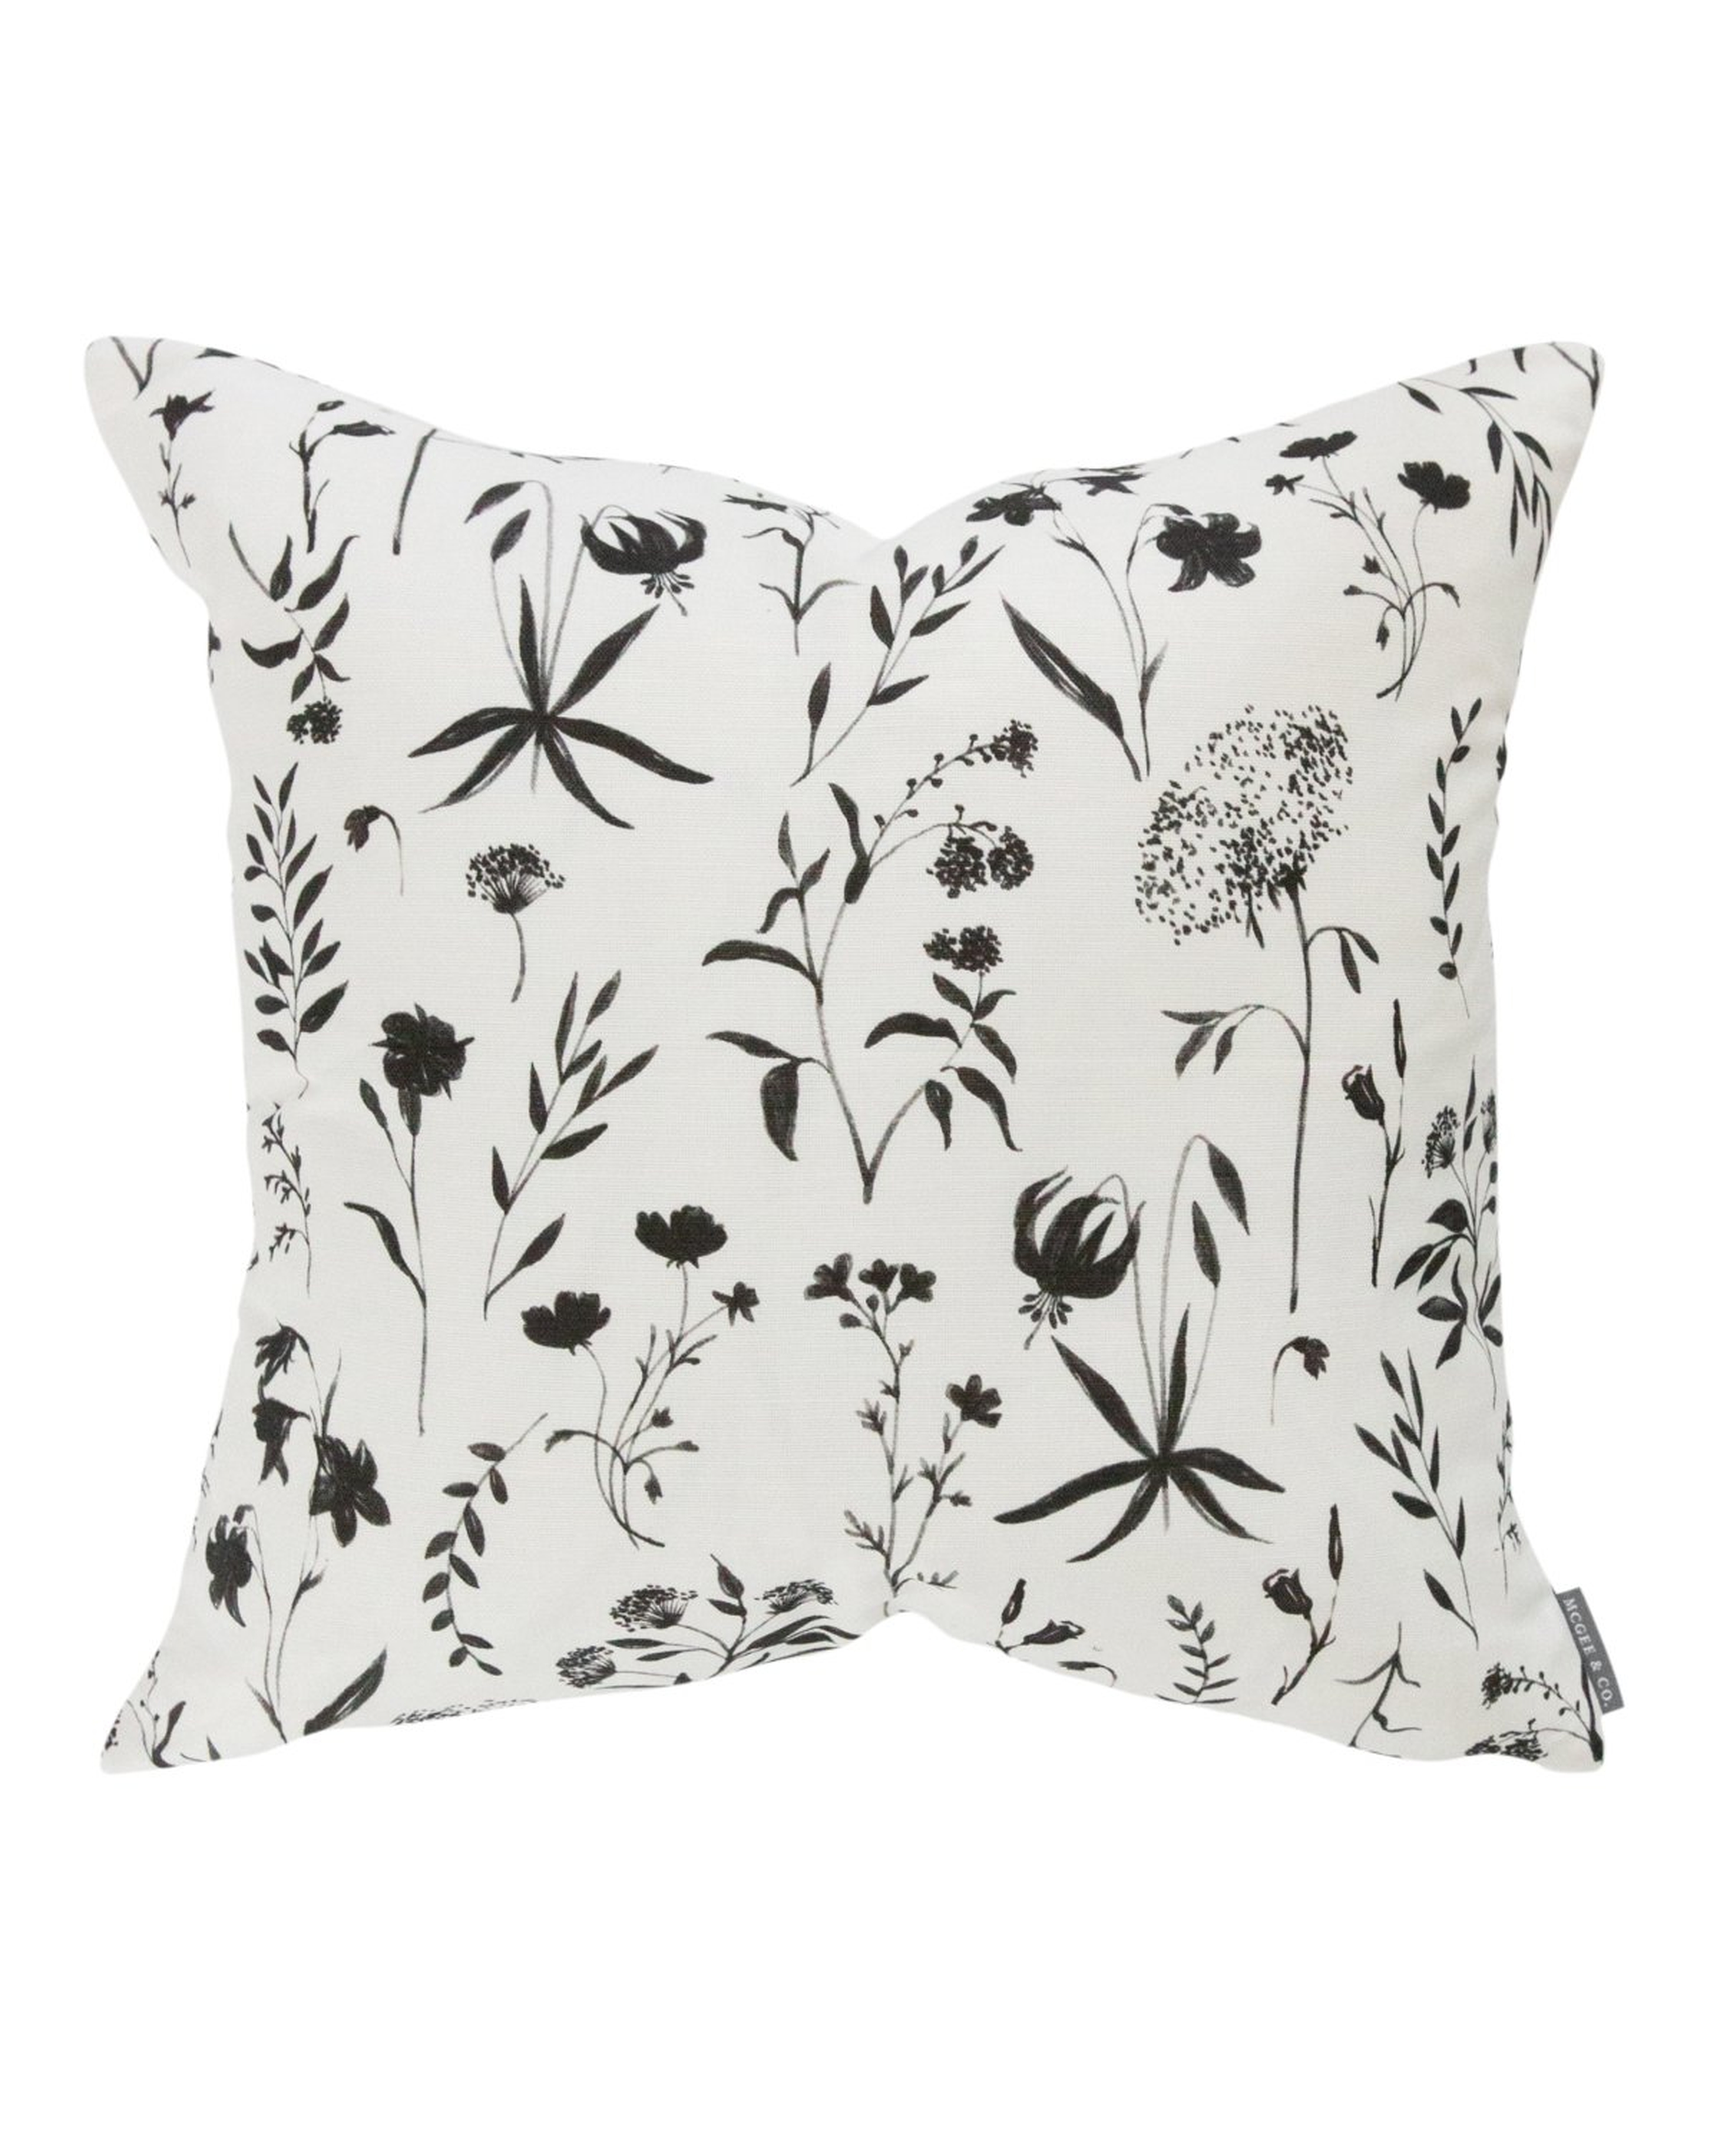 JUNO FLORAL PILLOW WITHOUT INSERT, WHITE, 20" x 20" - McGee & Co.